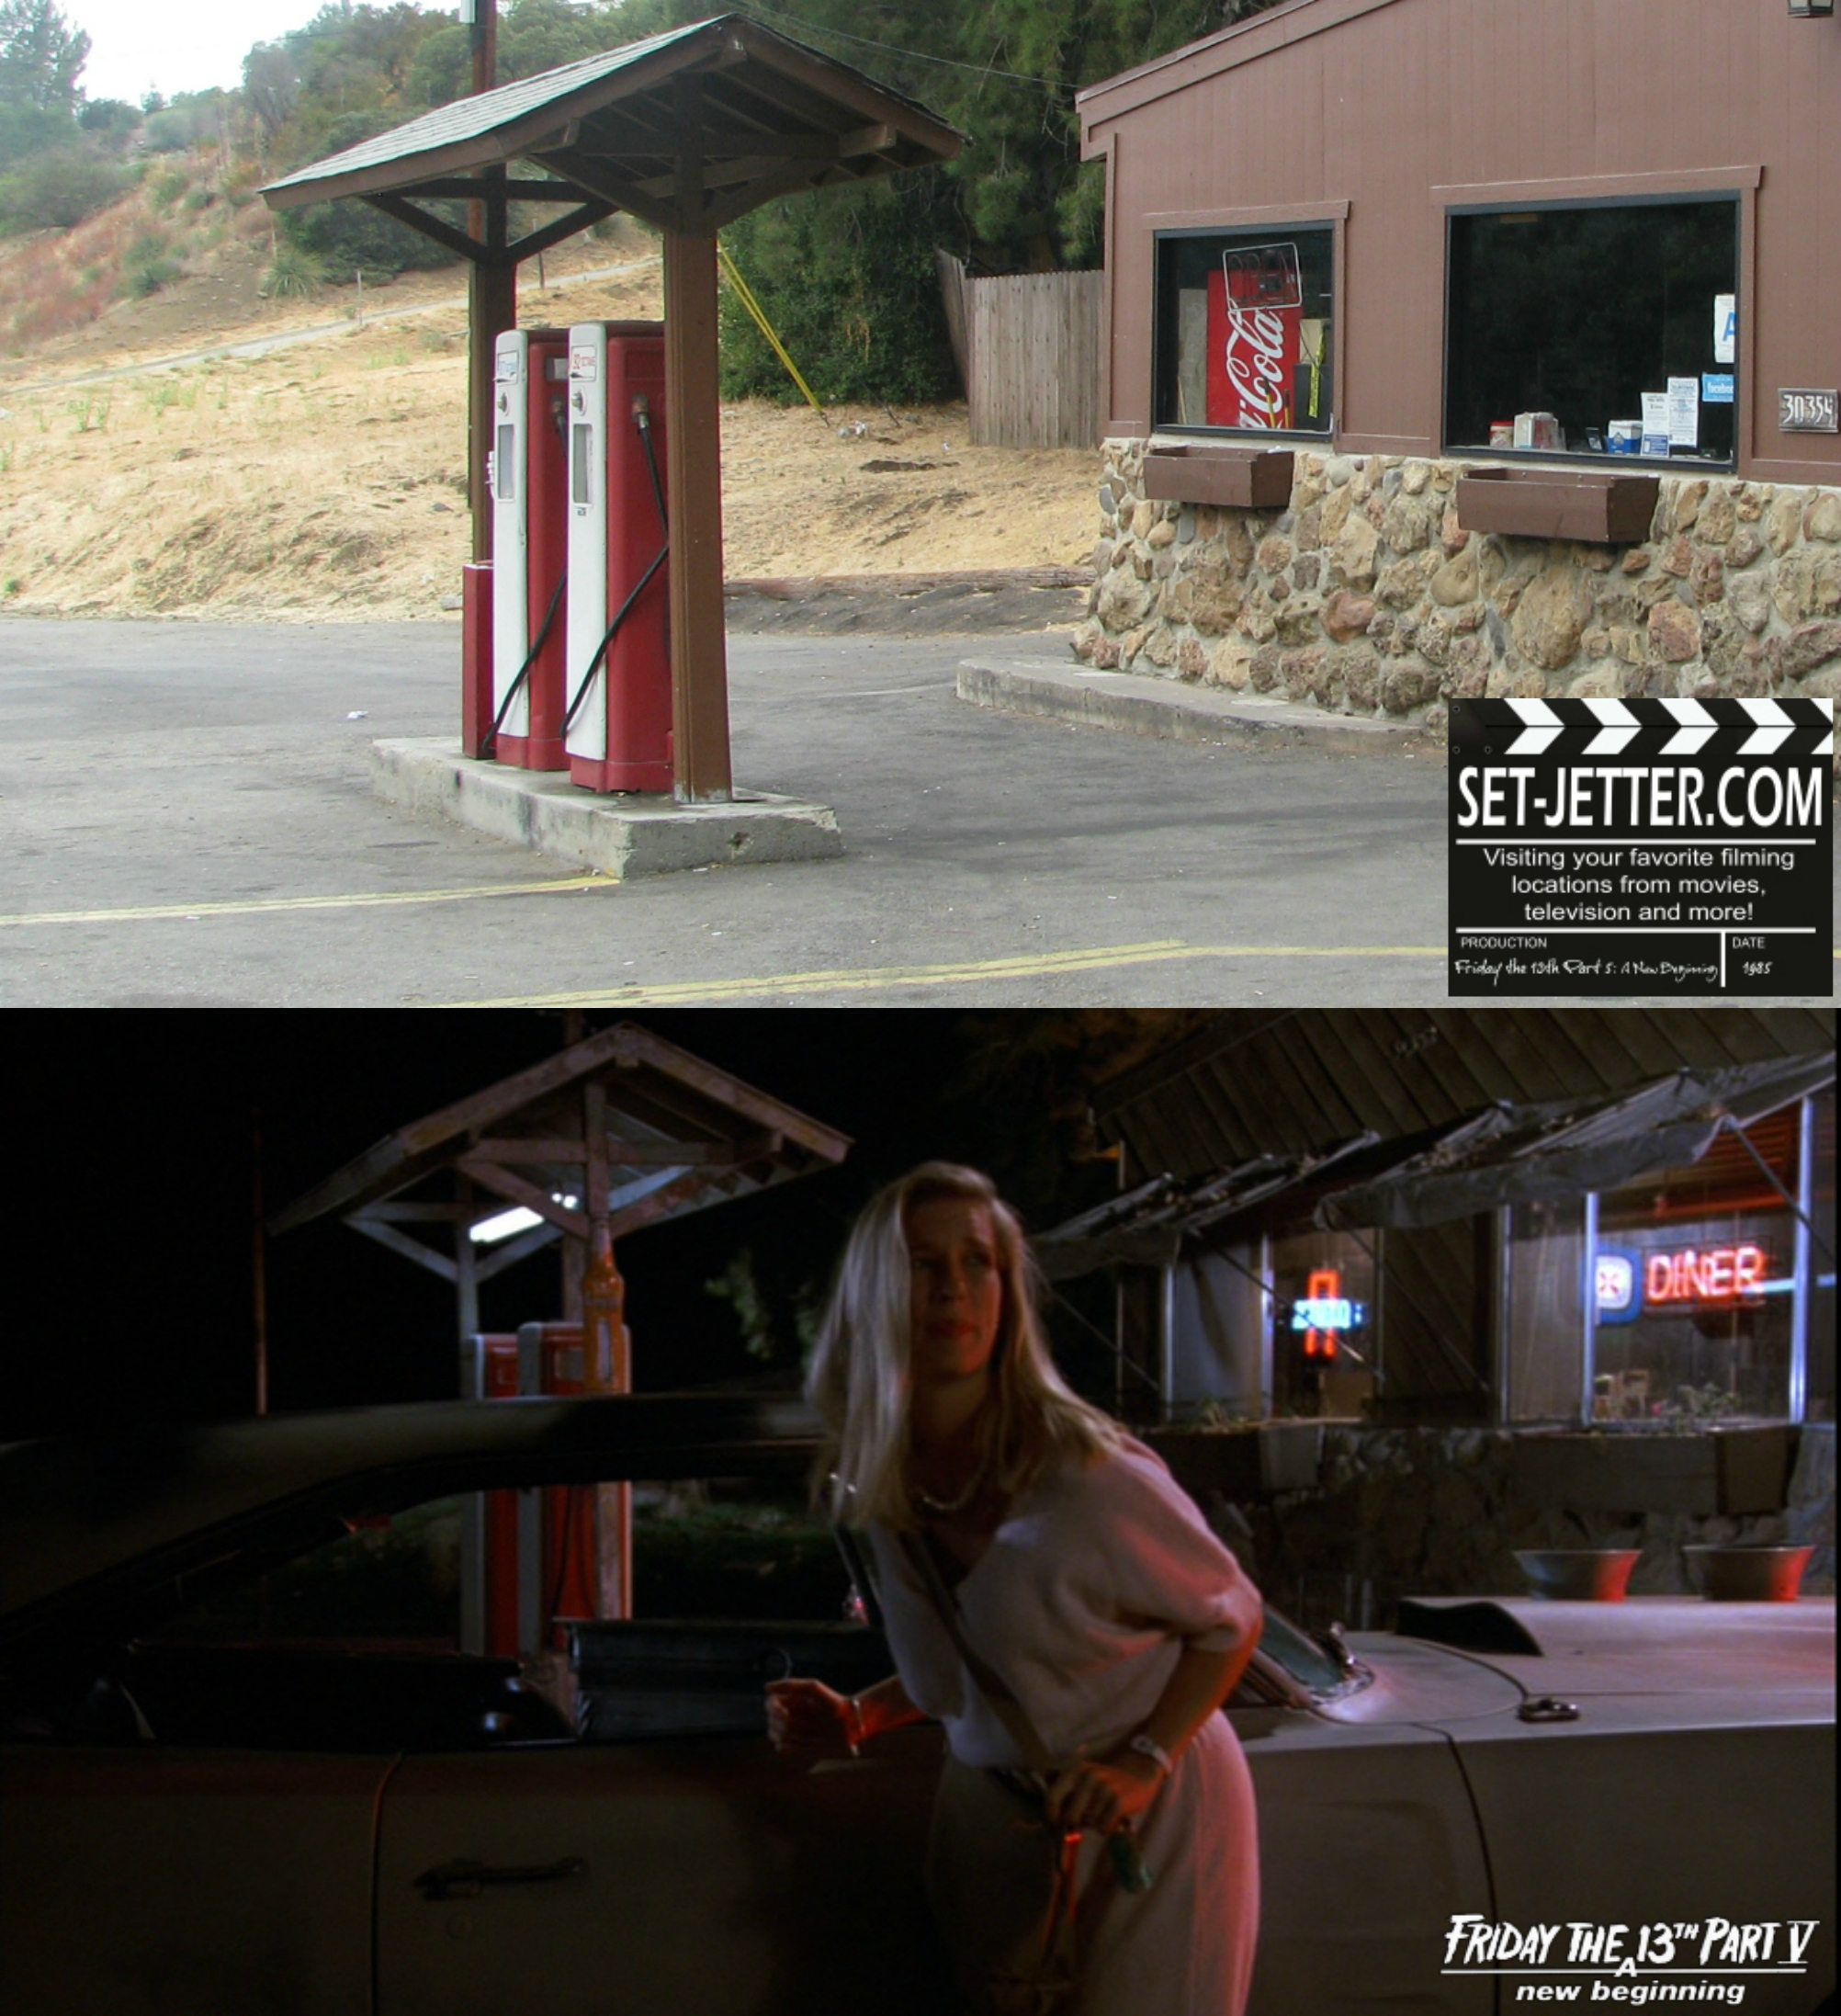 Friday the 13th Part V comparison 18.jpg